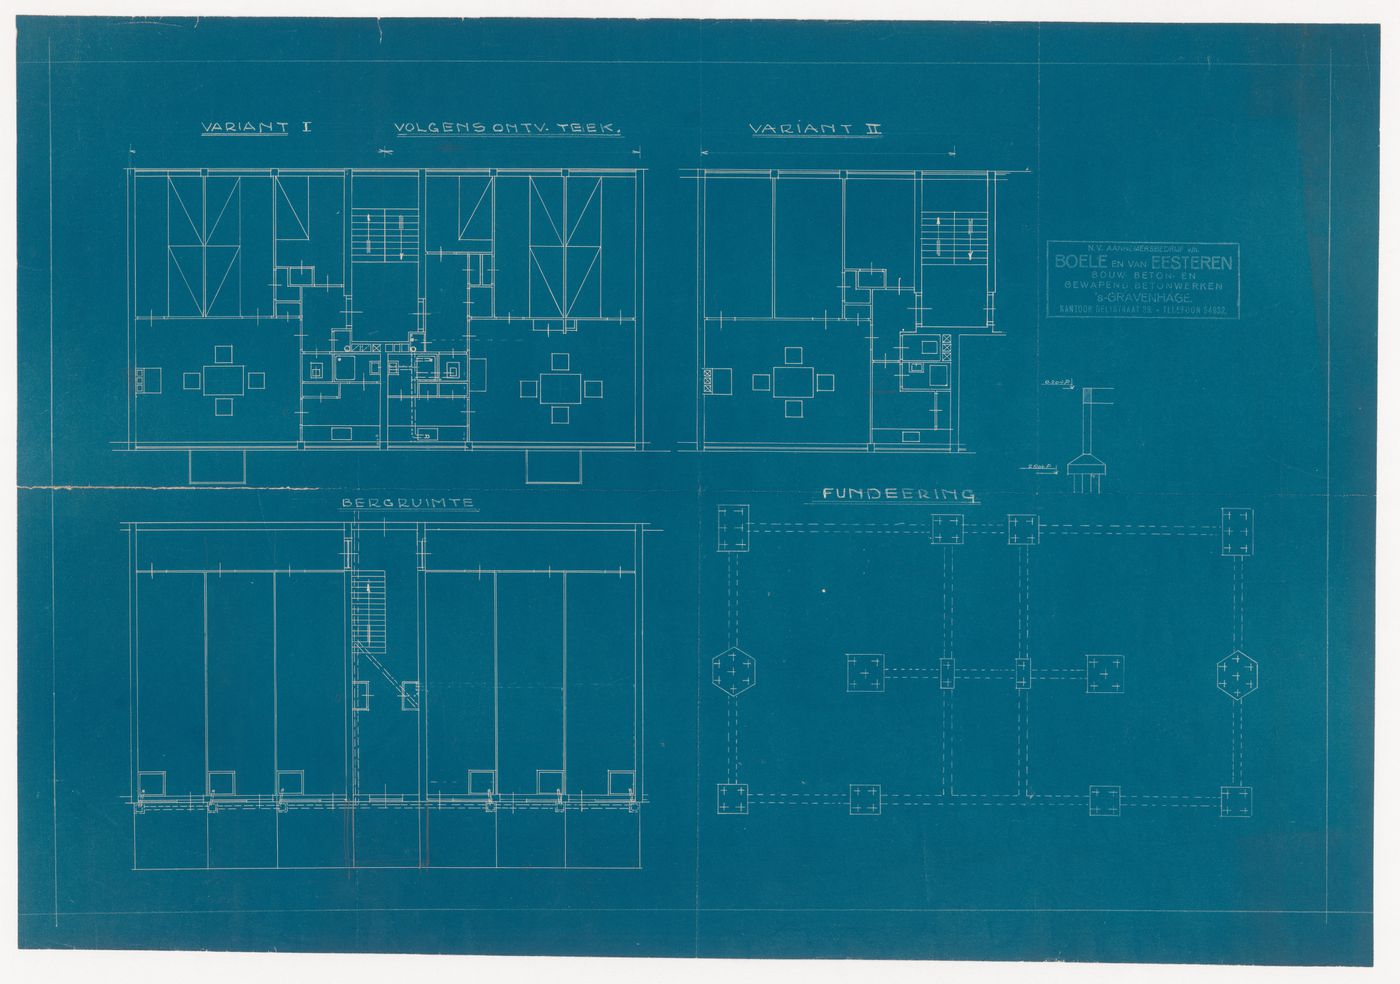 Foundation plan, plans and partial section for two types of housing units for Blijdorp Workers' Housing Quarter, Rotterdam, Netherlands